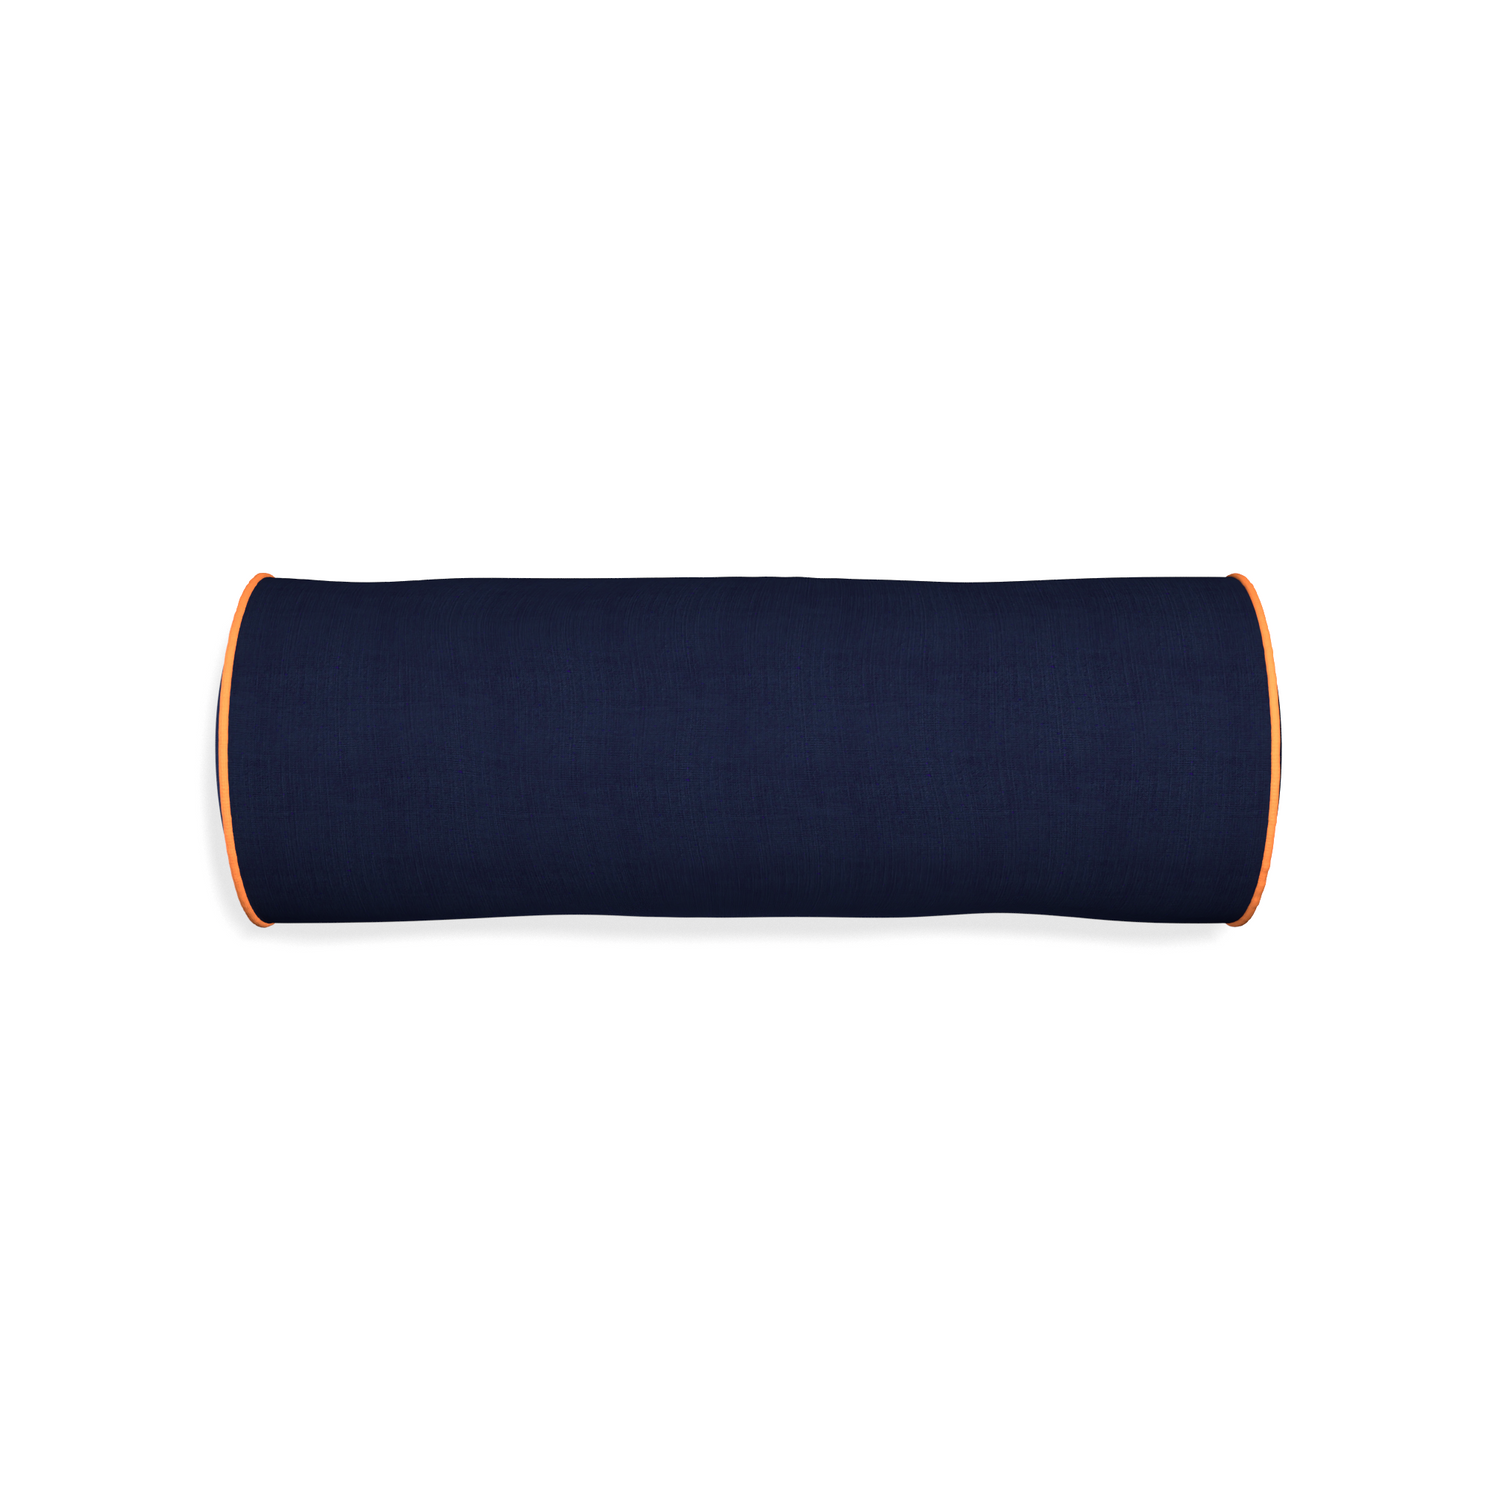 Bolster midnight custom navy bluepillow with clementine piping on white background